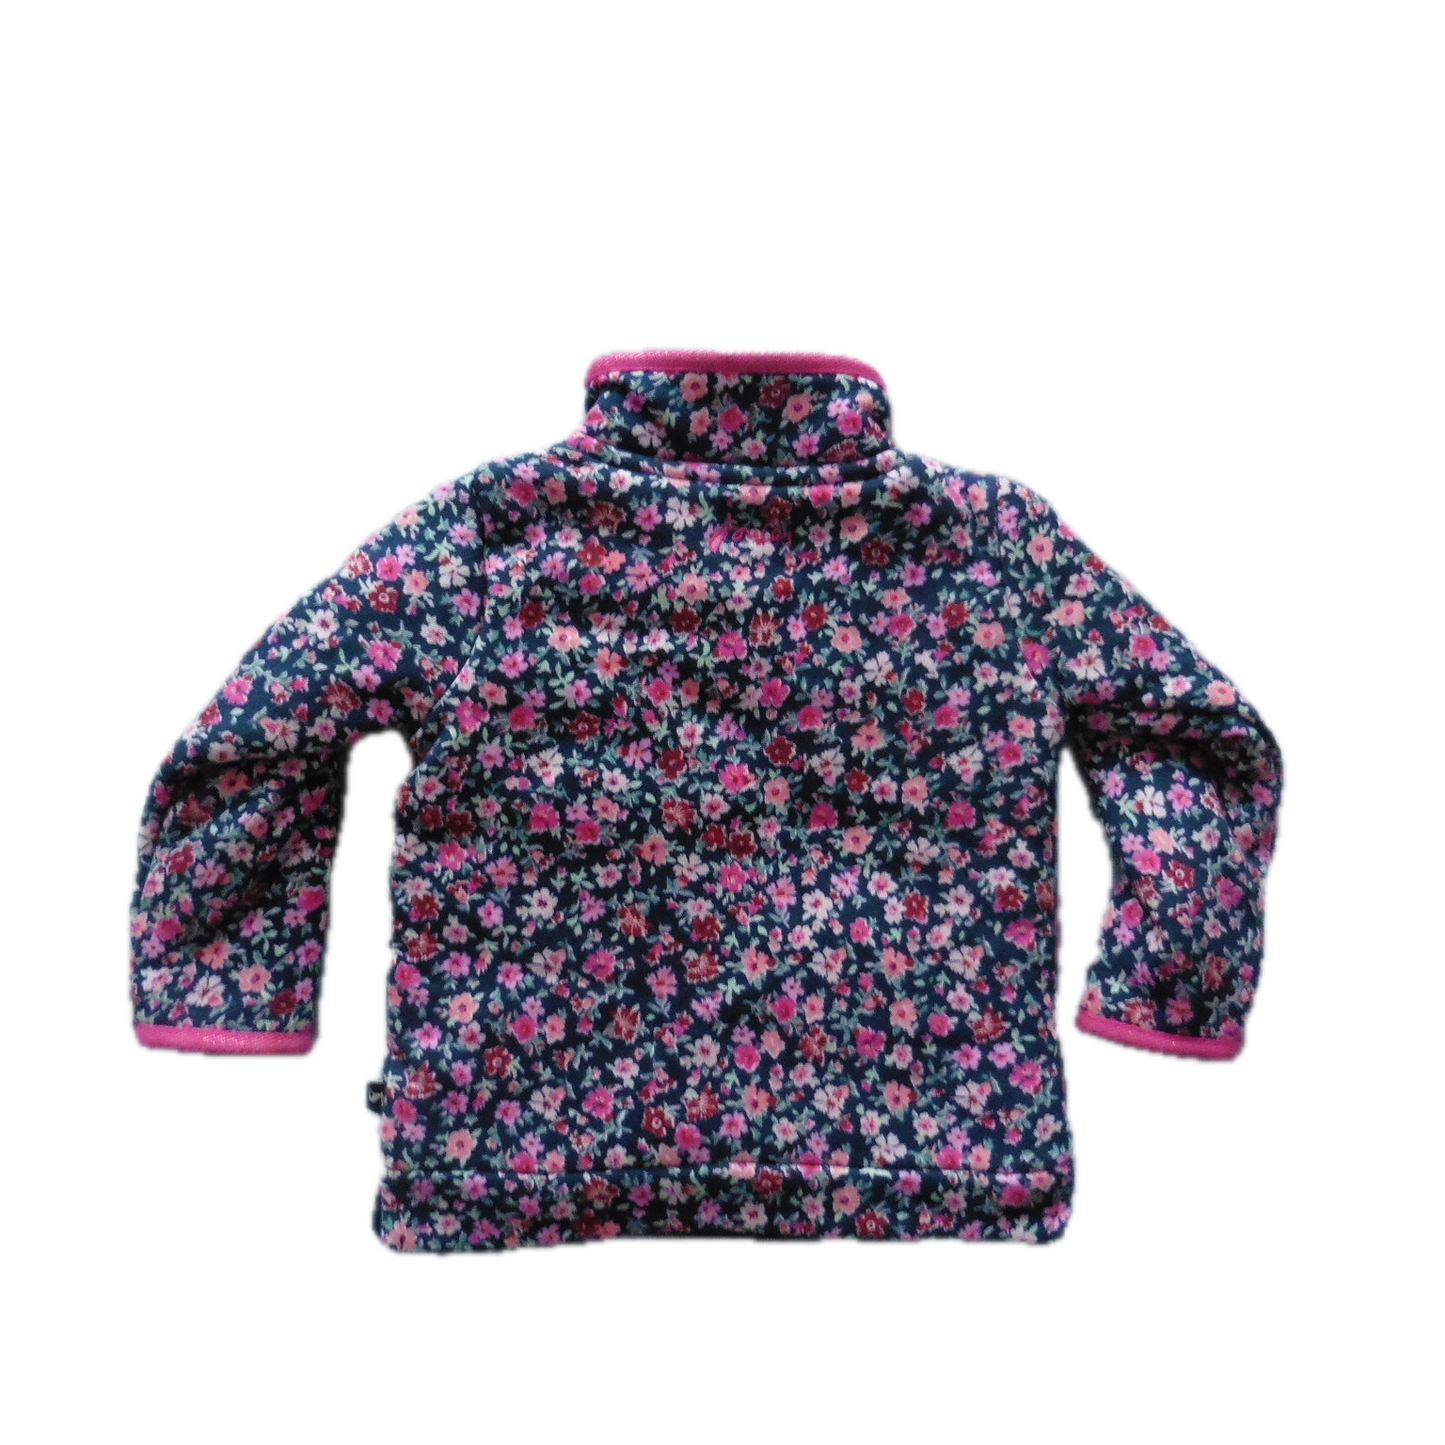 Preloved: Joules Navy with flowers Snuggle Fleece 2y